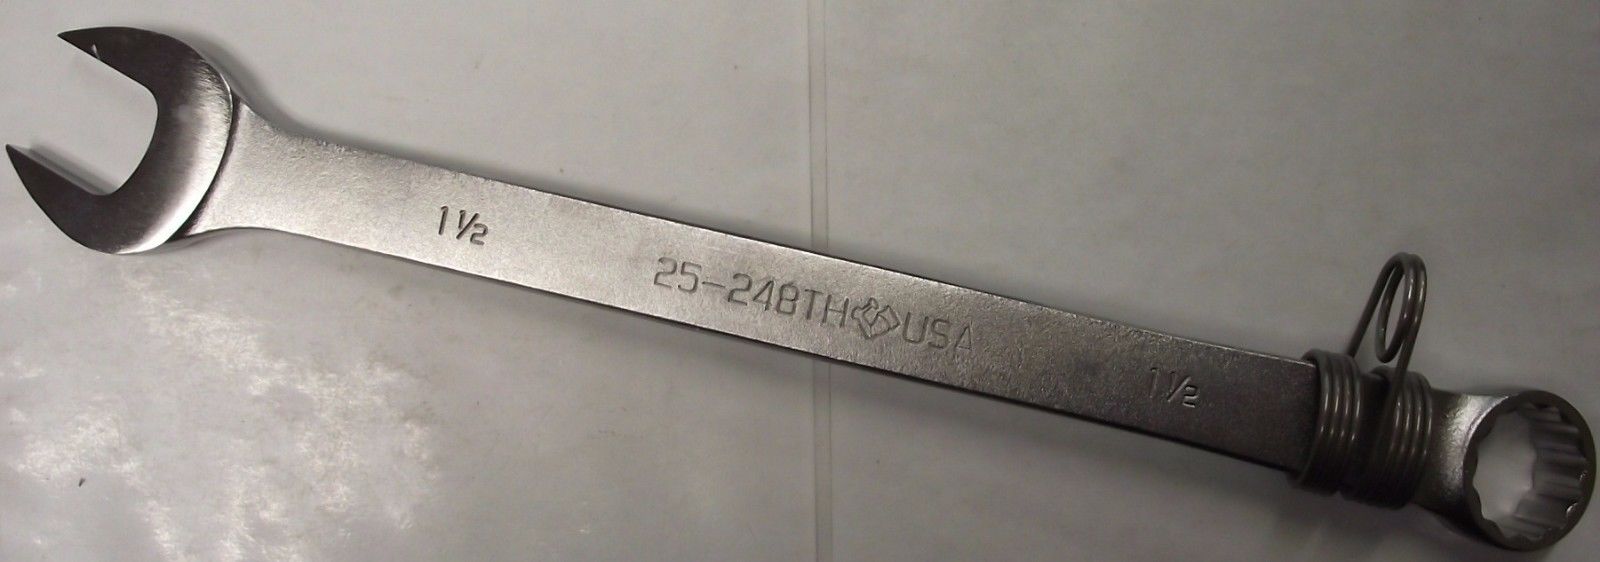 Armstrong 25-248TH 1-1/2" 12 Point Satin Finish Combo Wrench Tether Ready USA